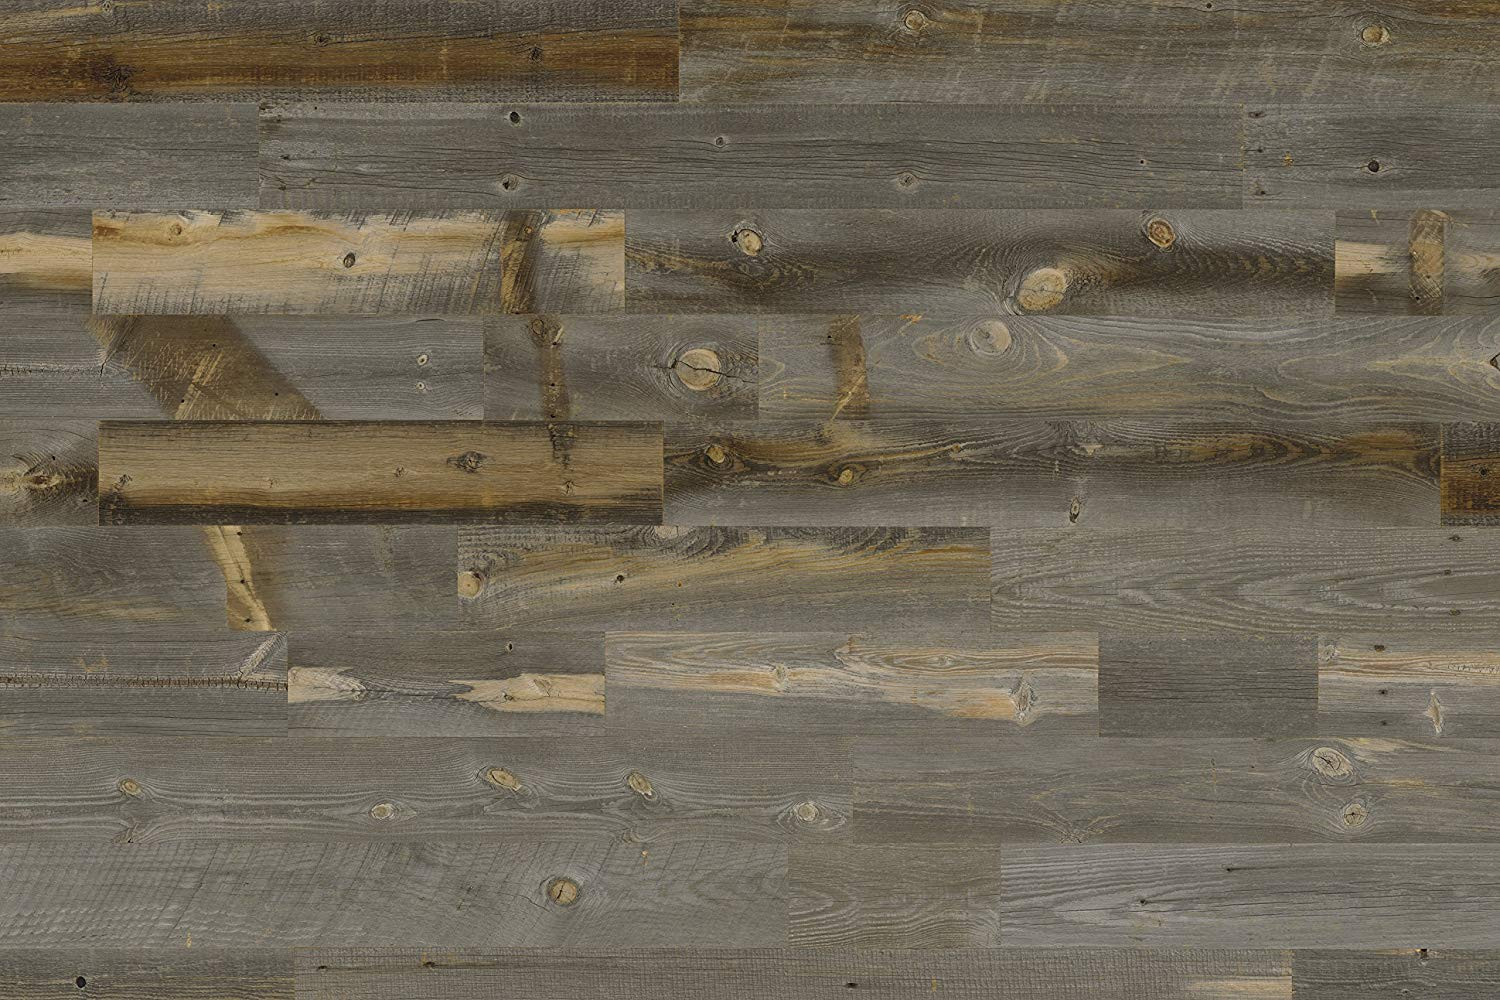 used hardwood flooring for sale of amazon com stikwood reclaimed weathered wood silver gray brown 20 inside amazon com stikwood reclaimed weathered wood silver gray brown 20 square feet easy peel and stick application baby